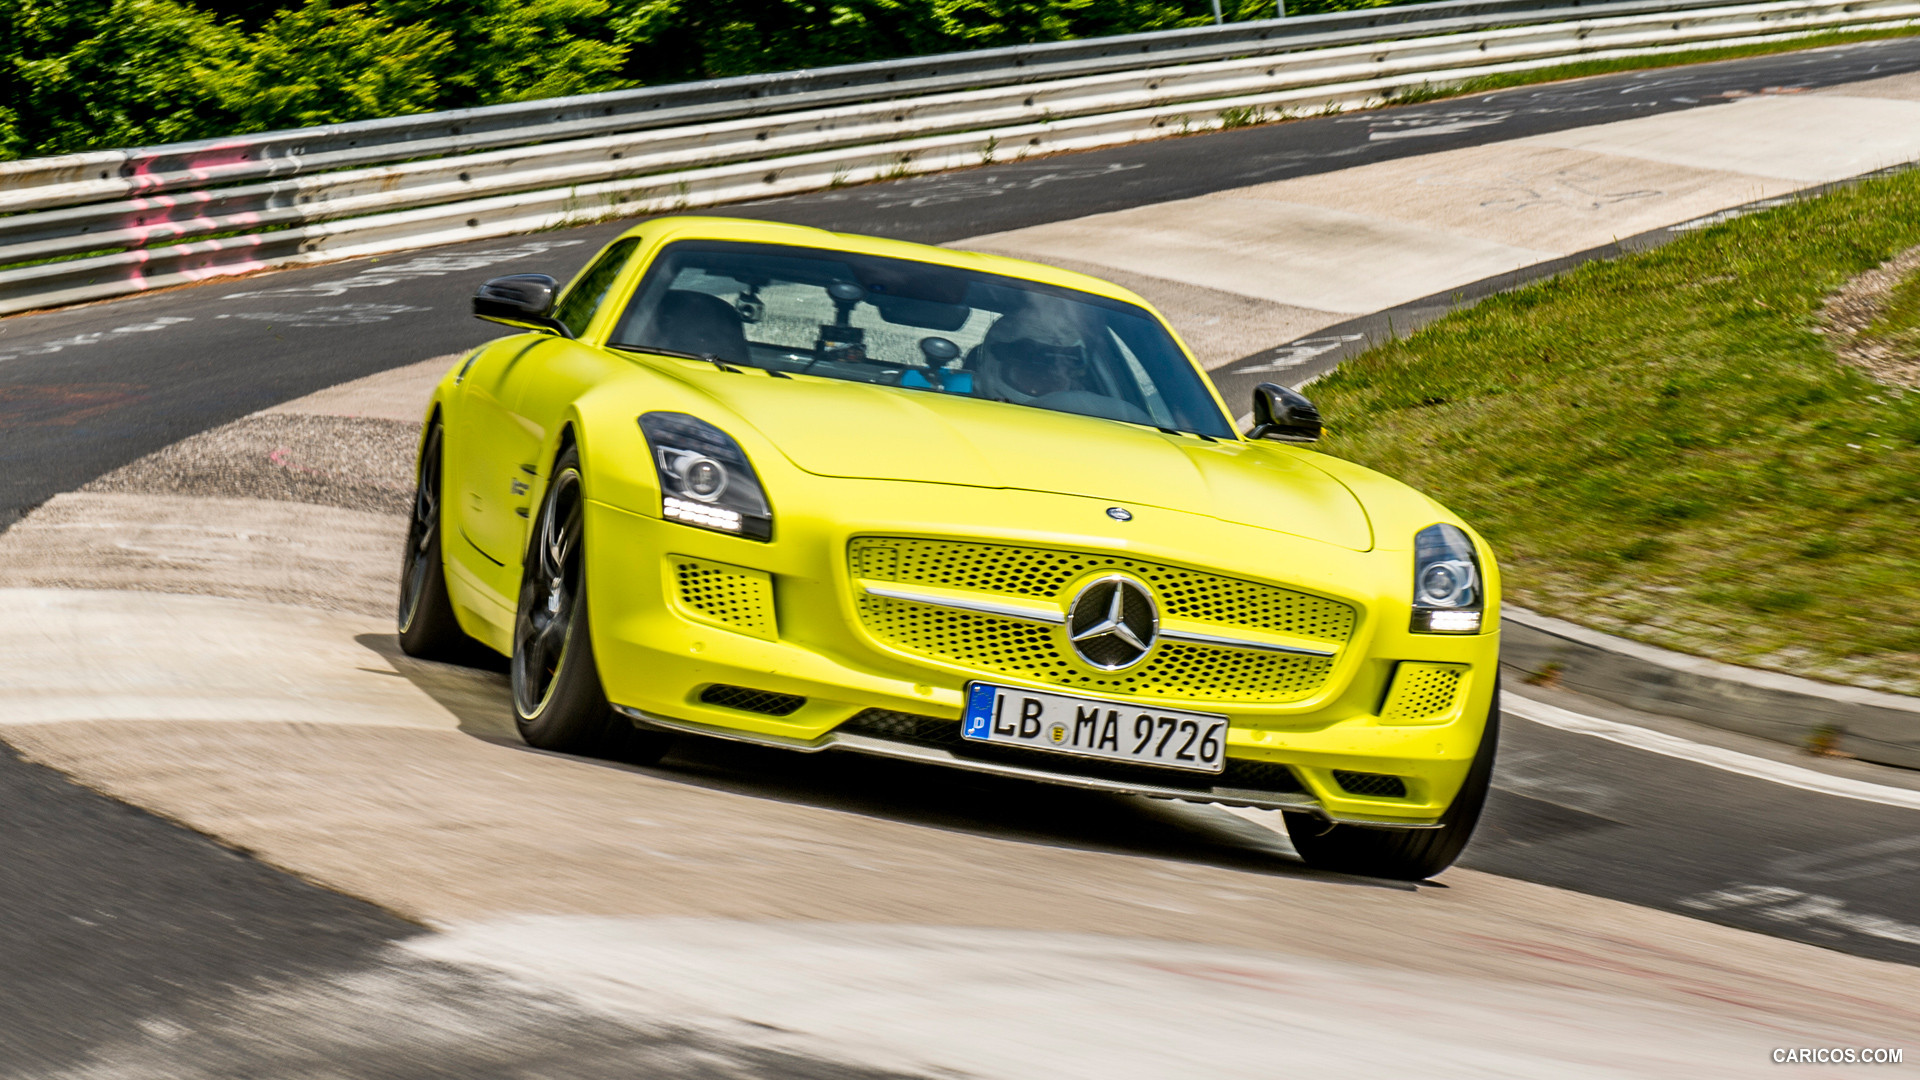 2014 Mercedes-Benz SLS AMG Coupe Electric Drive, Yellow at Nürburgring   - Front, #37 of 47